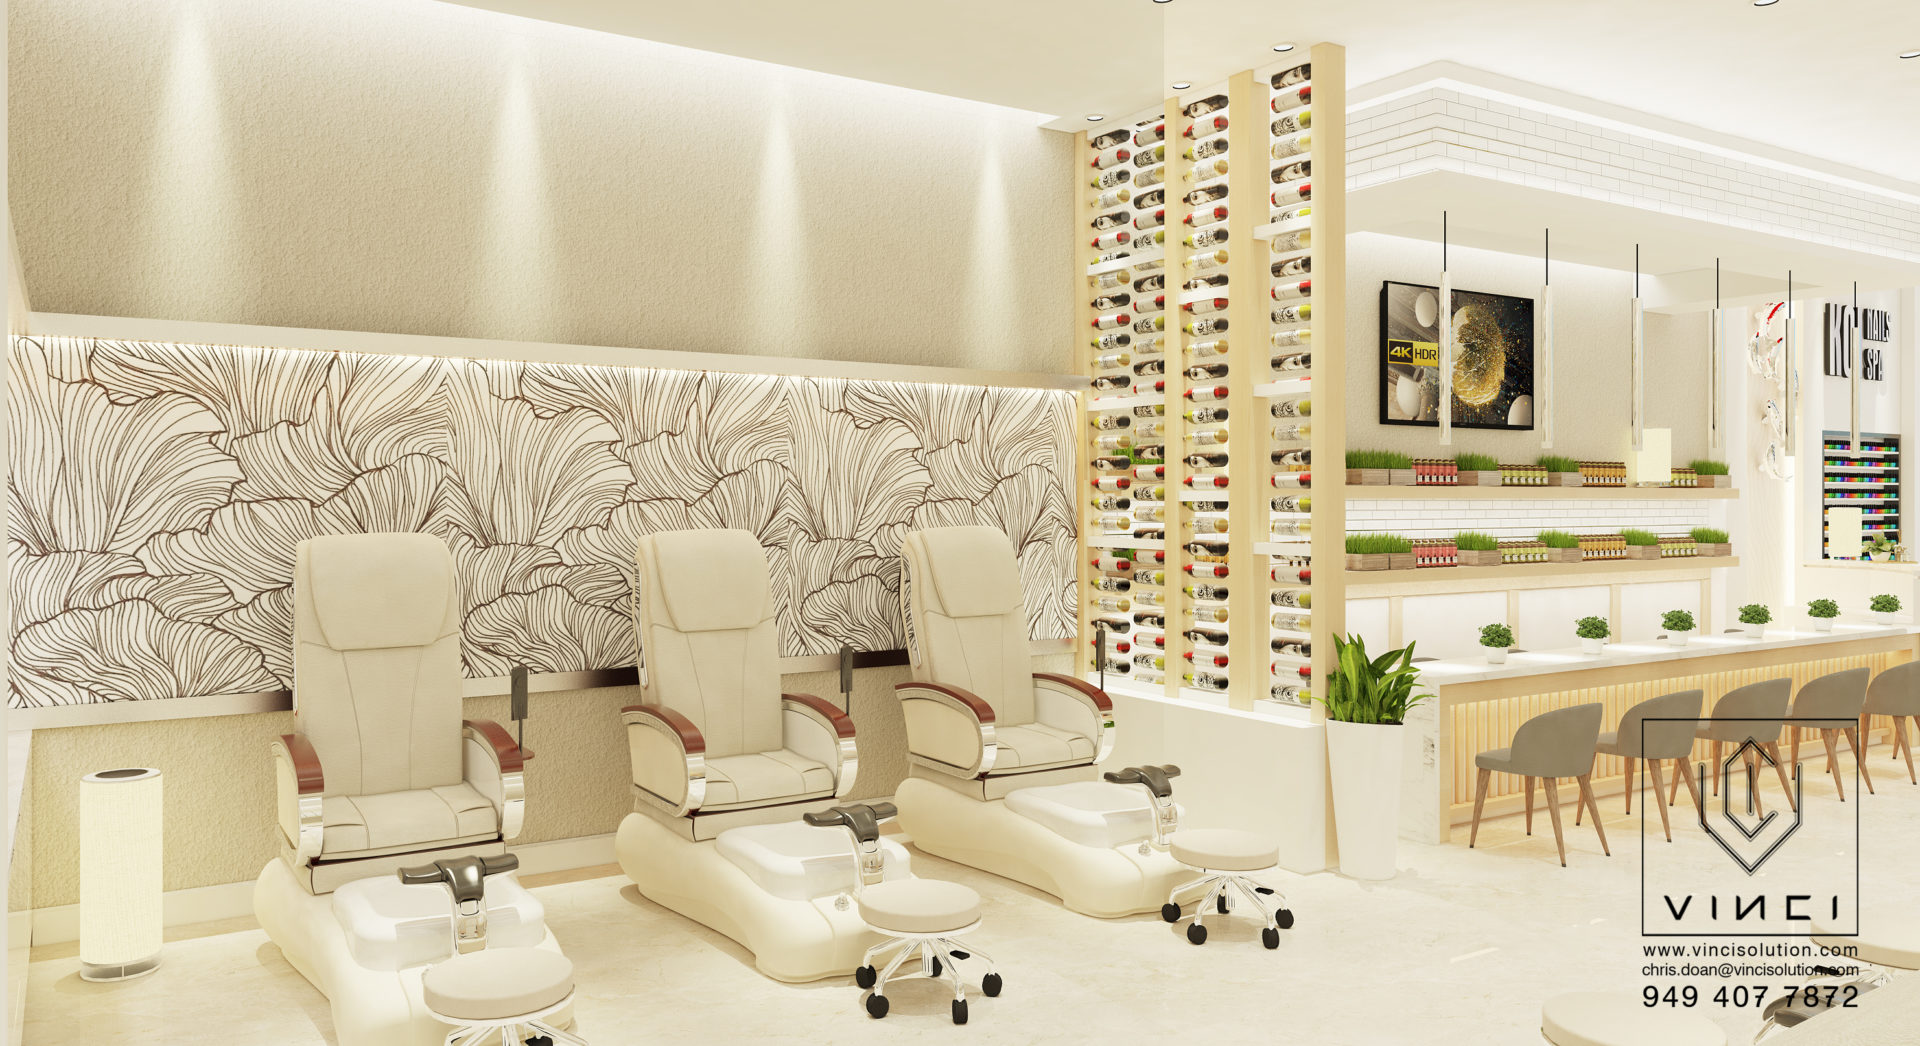 1. "Nail Salon Design Ideas: Painted Walls and Floors" - wide 7